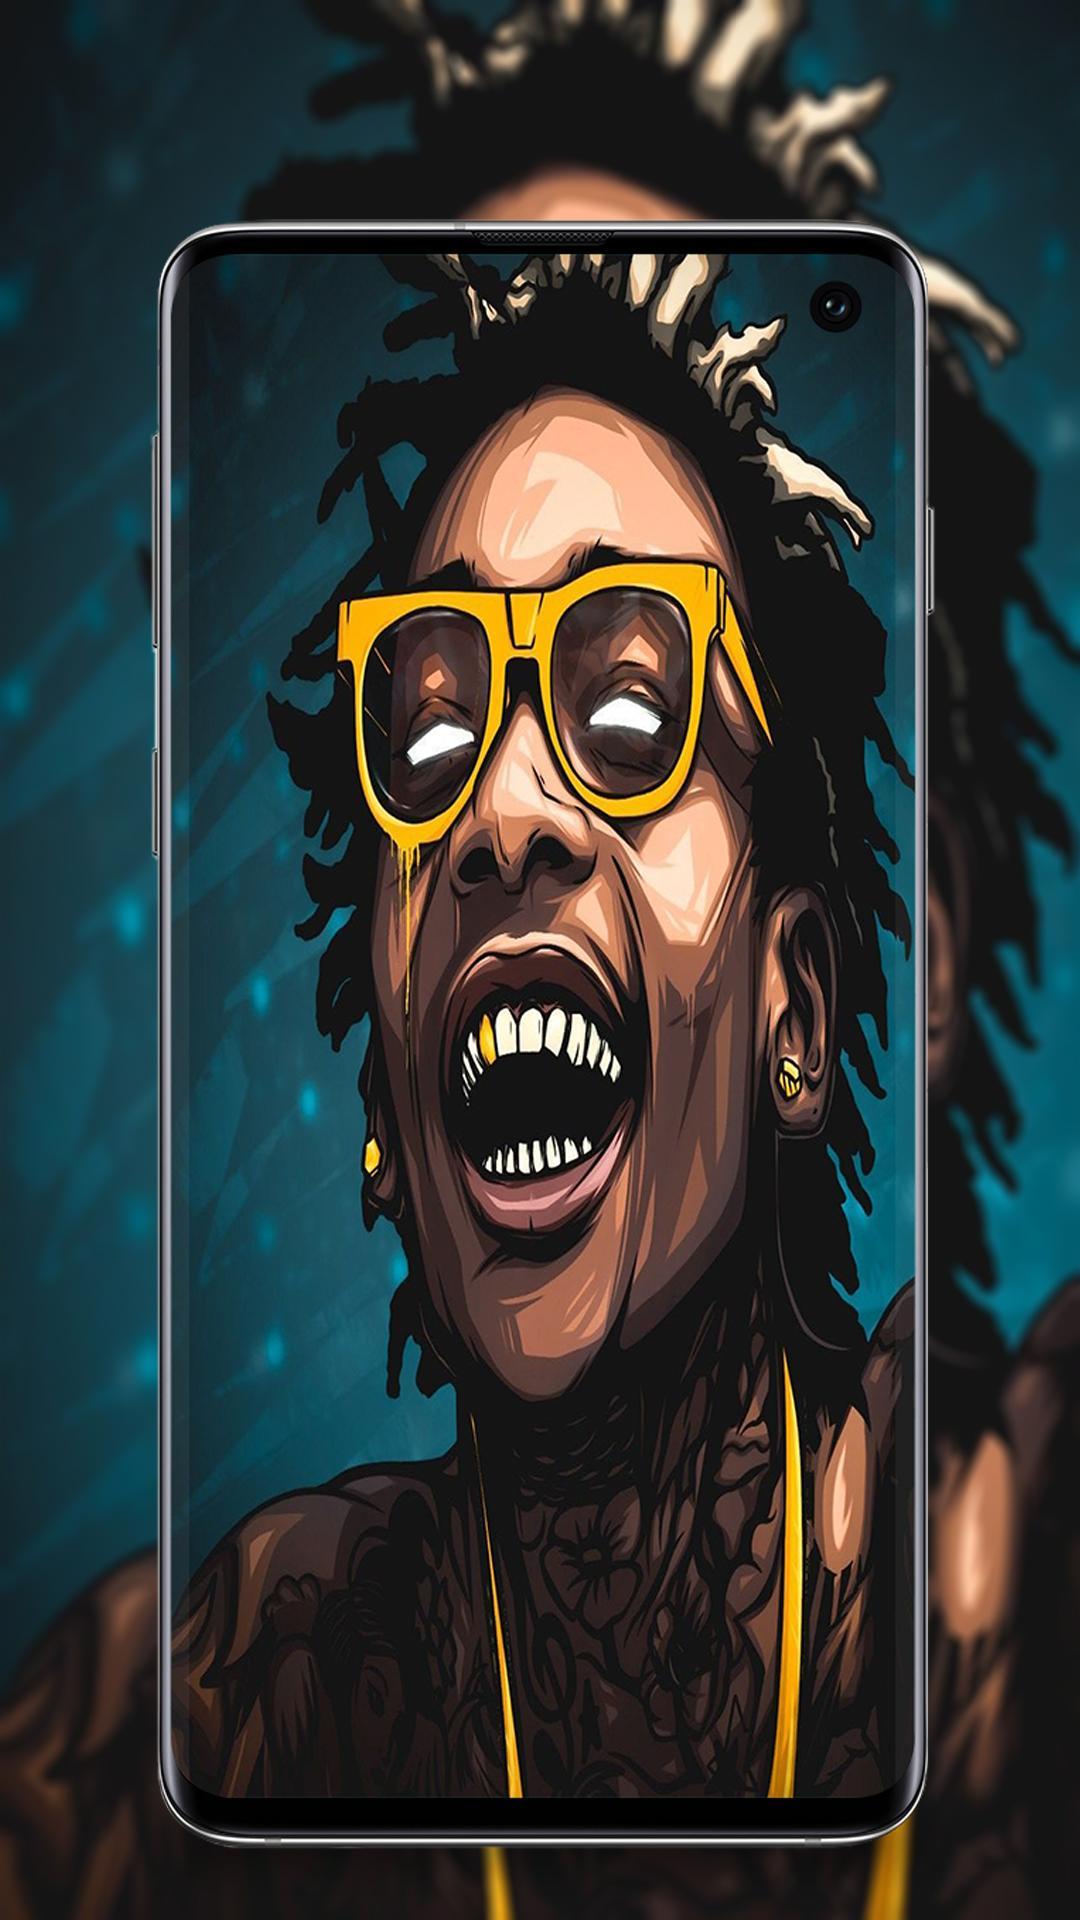 Ghetto Wallpaper Dope Trill Lit For Android Apk